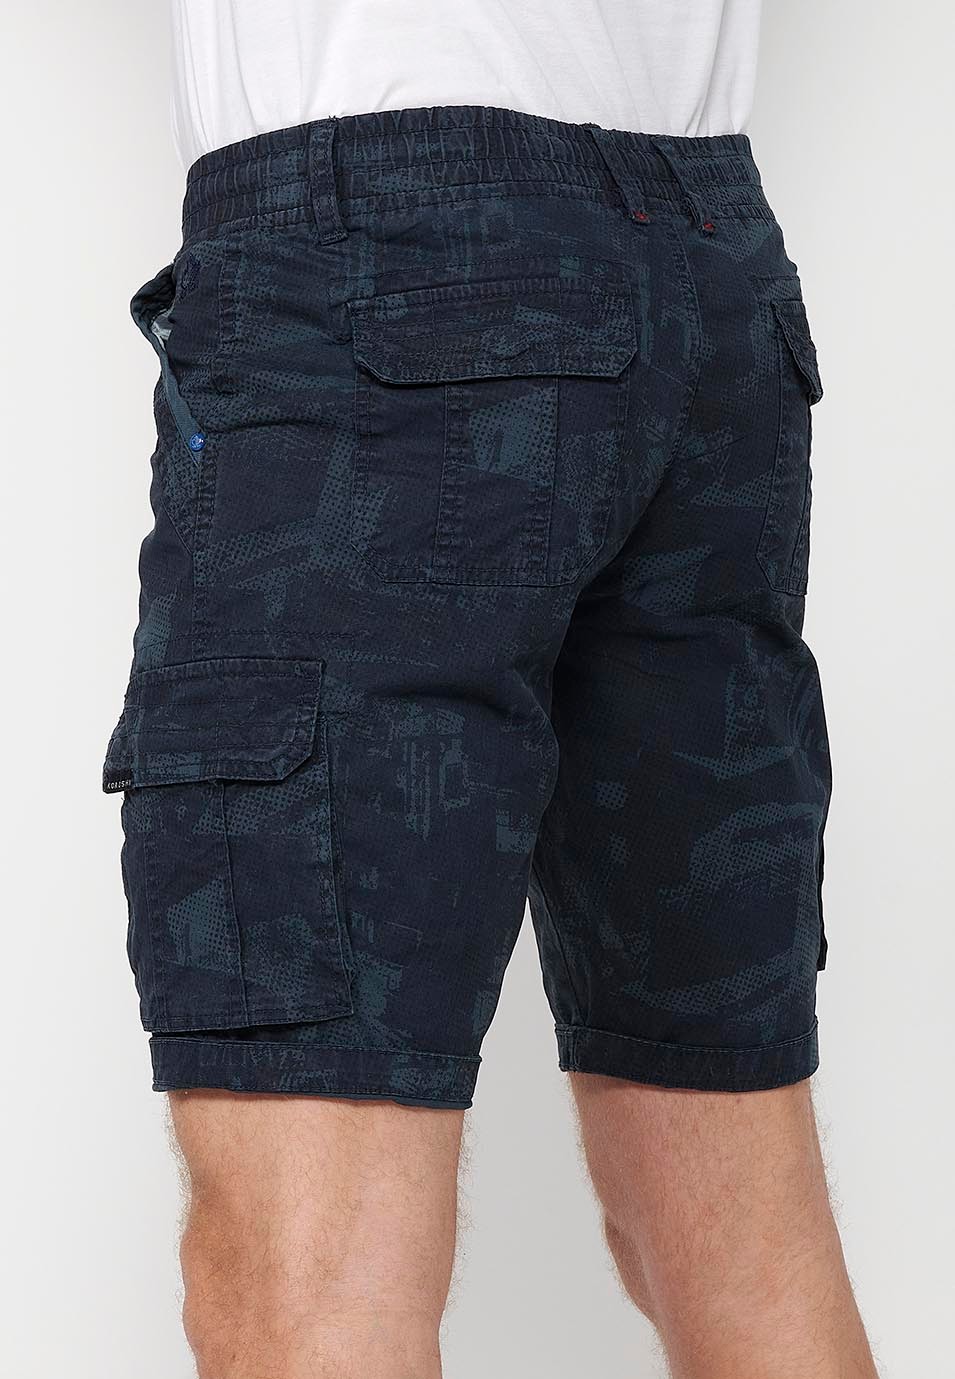 Cargo shorts with front closure with zipper and button and four pockets, two rear pockets with flap with two cargo pockets with flap and adjustable waist with drawstring in Blue for Men 9